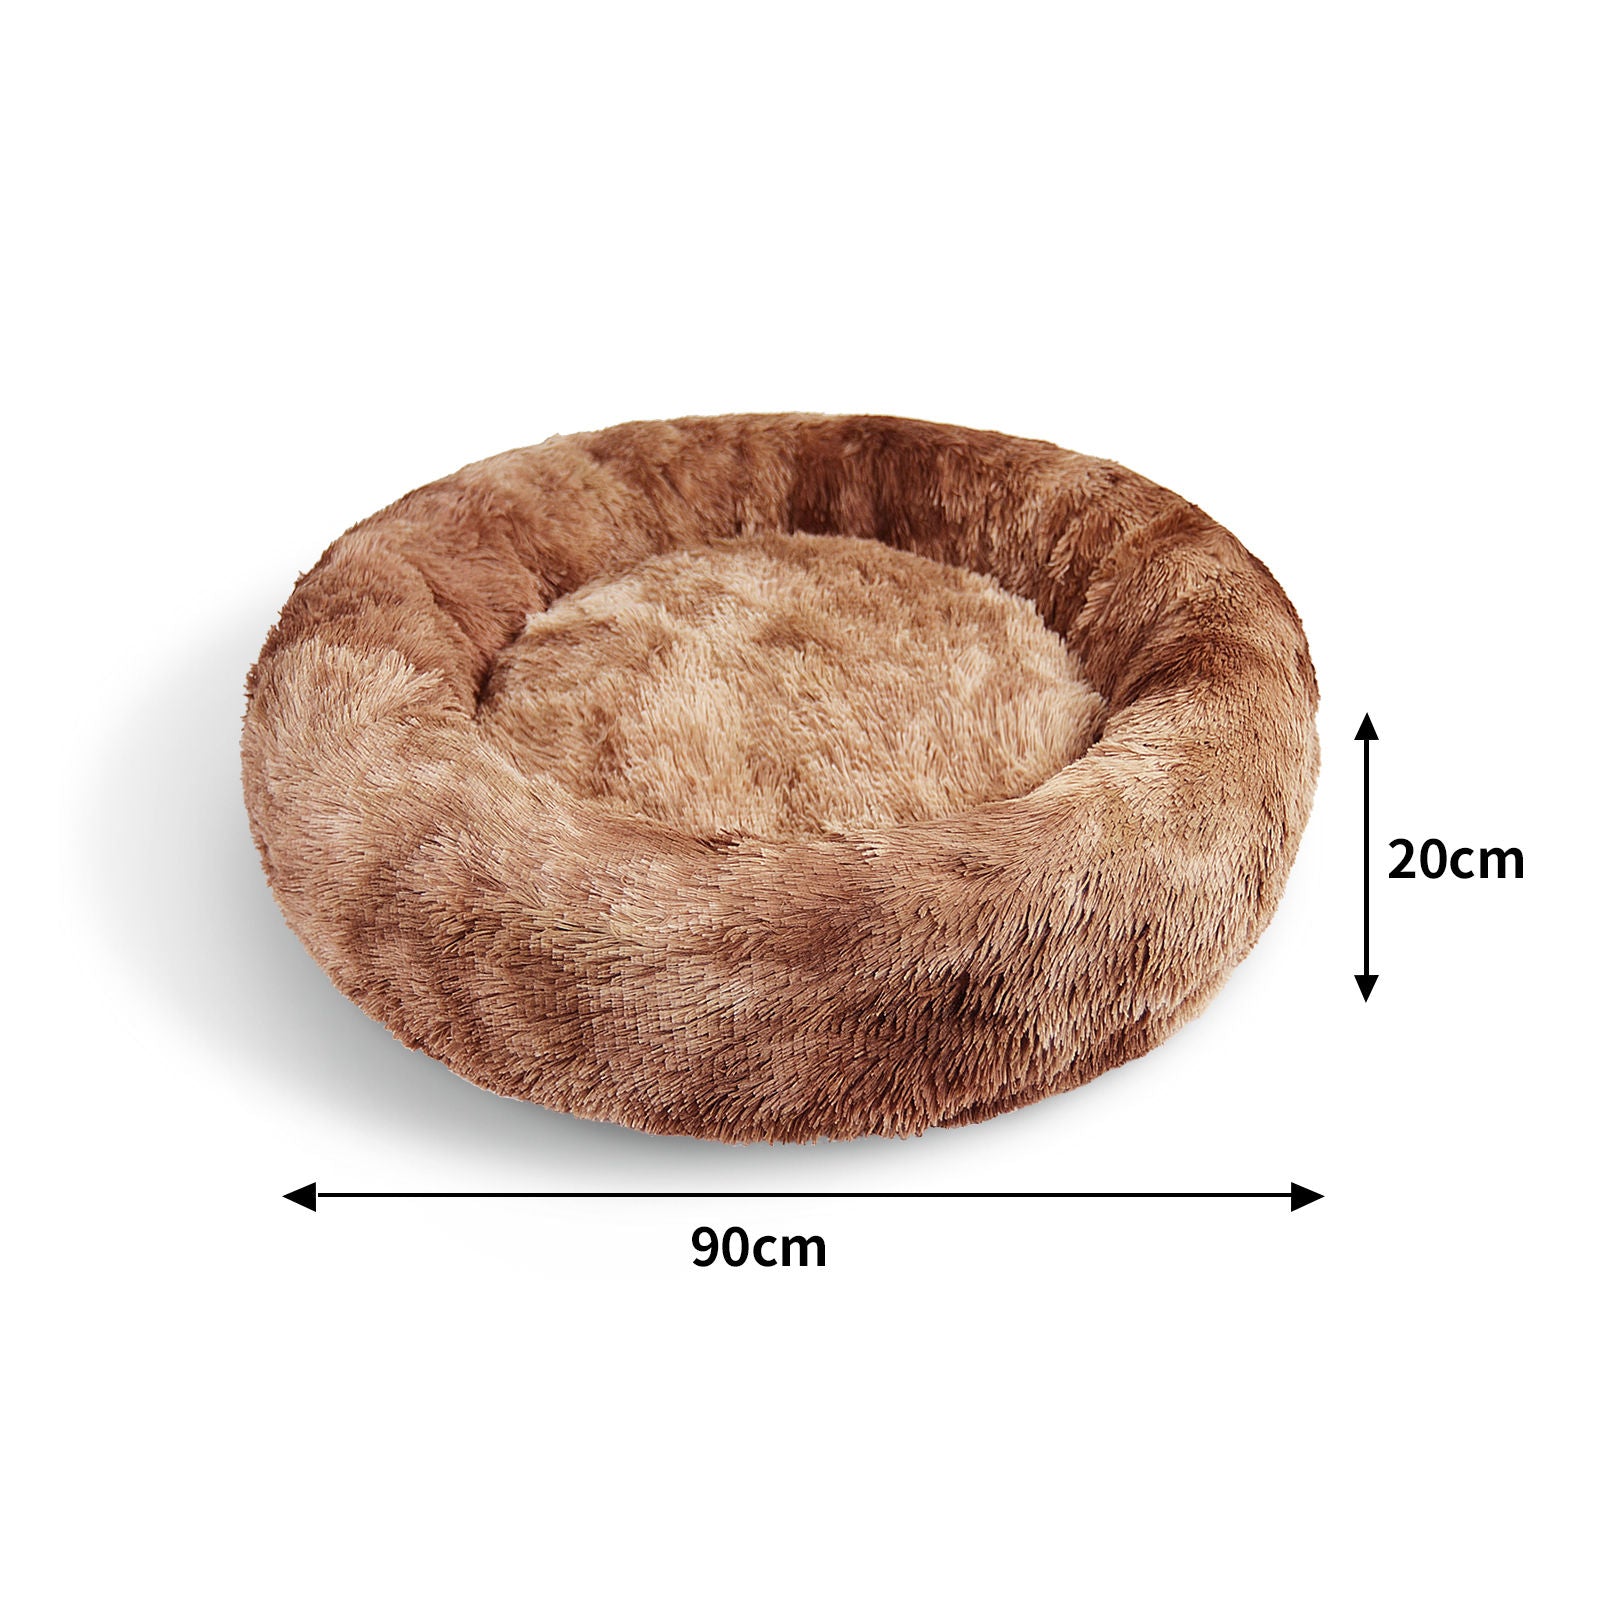 Pawfriends Dog Cat Pet Calming Bed Warm Soft Plush Round Nest Comfy Sleeping Kennel Cave AU